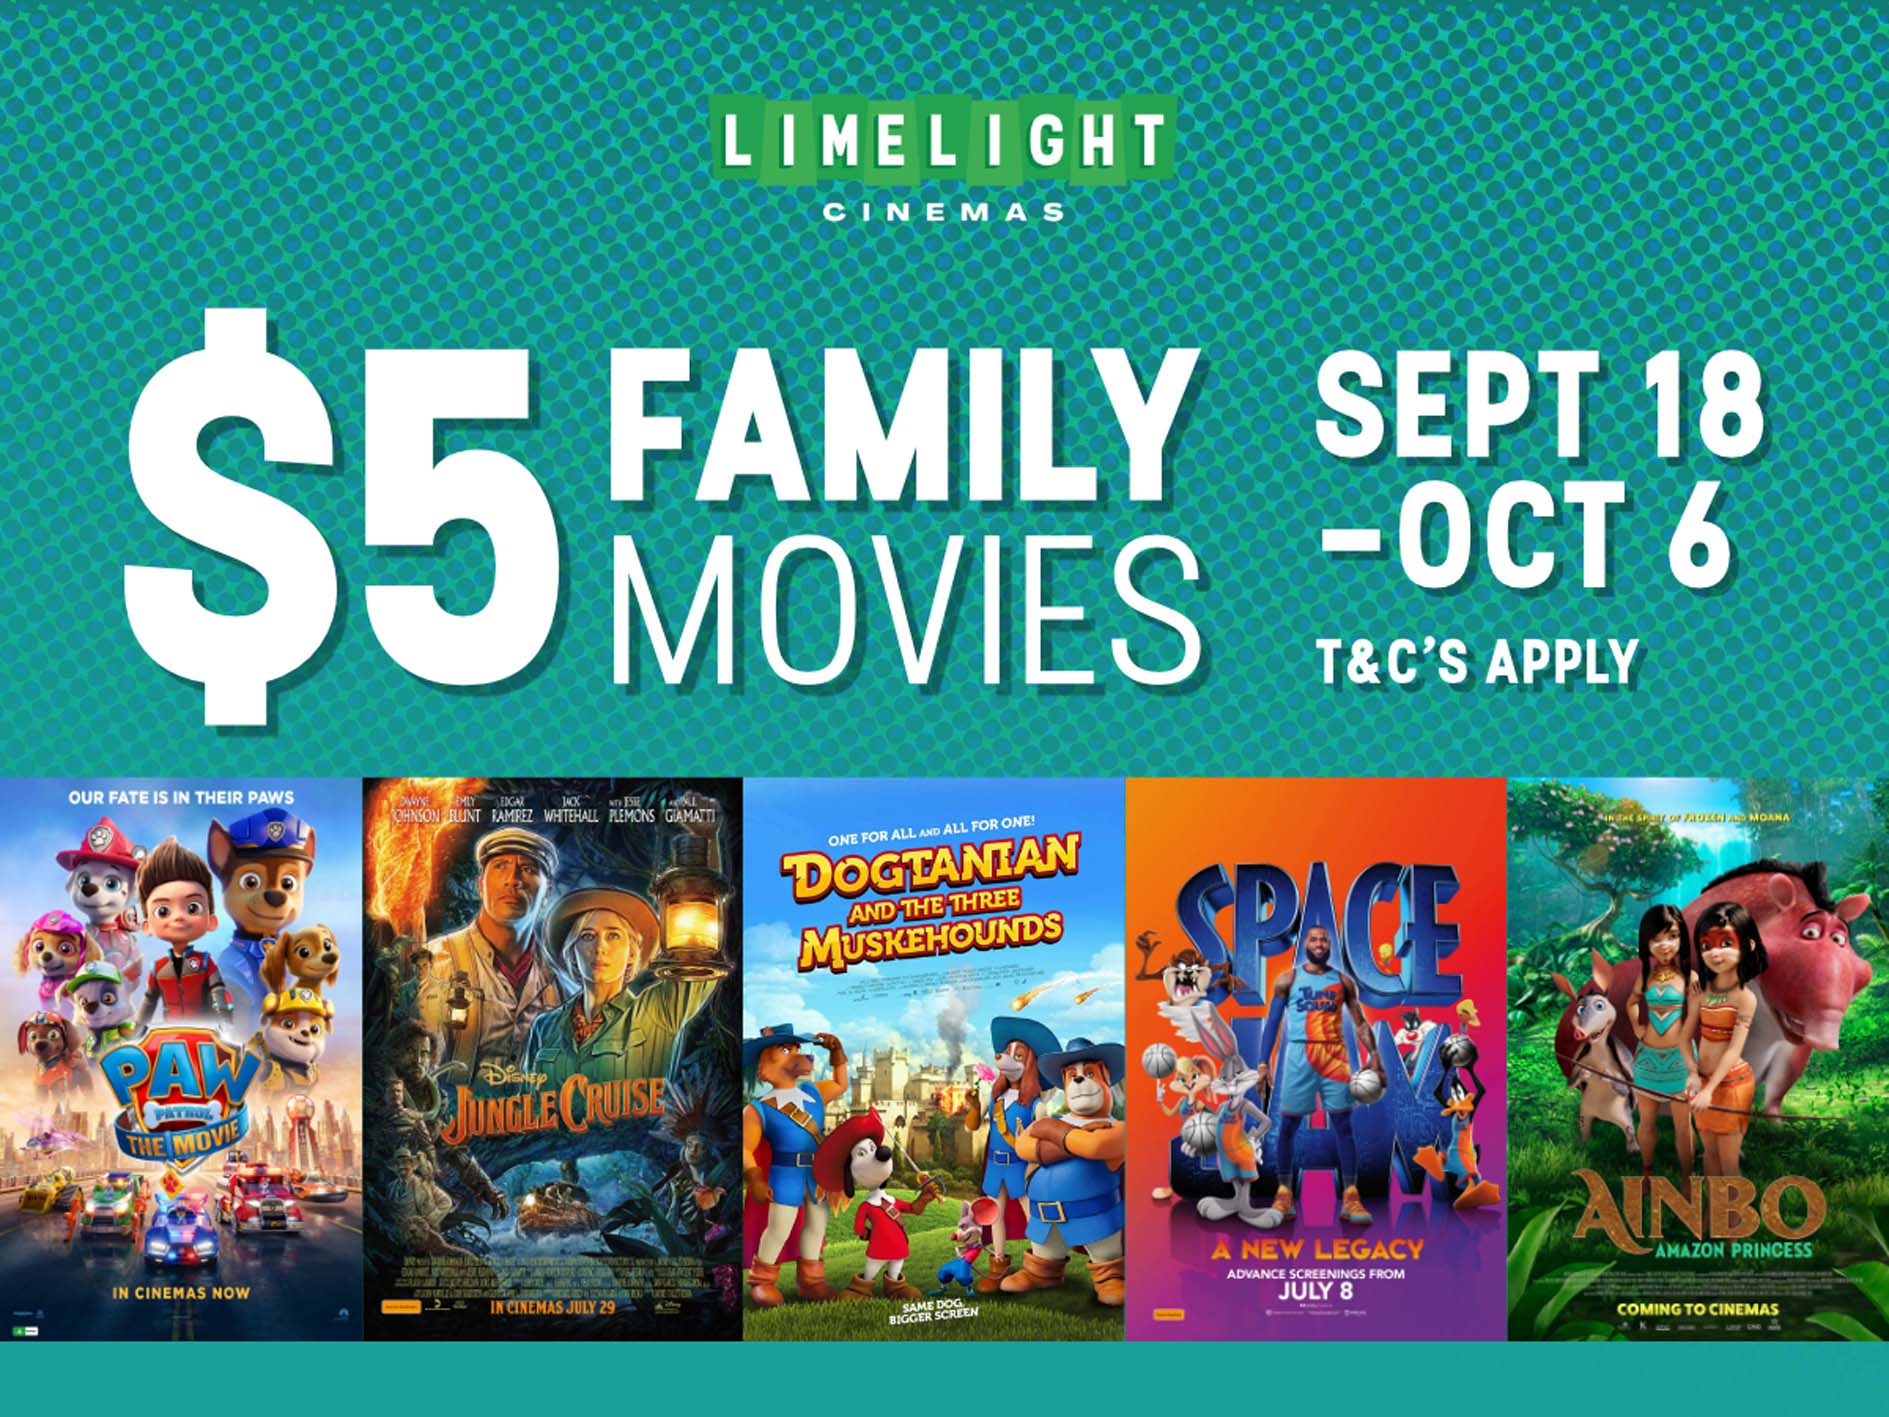 $5 movies at Limelight for the September school holidays